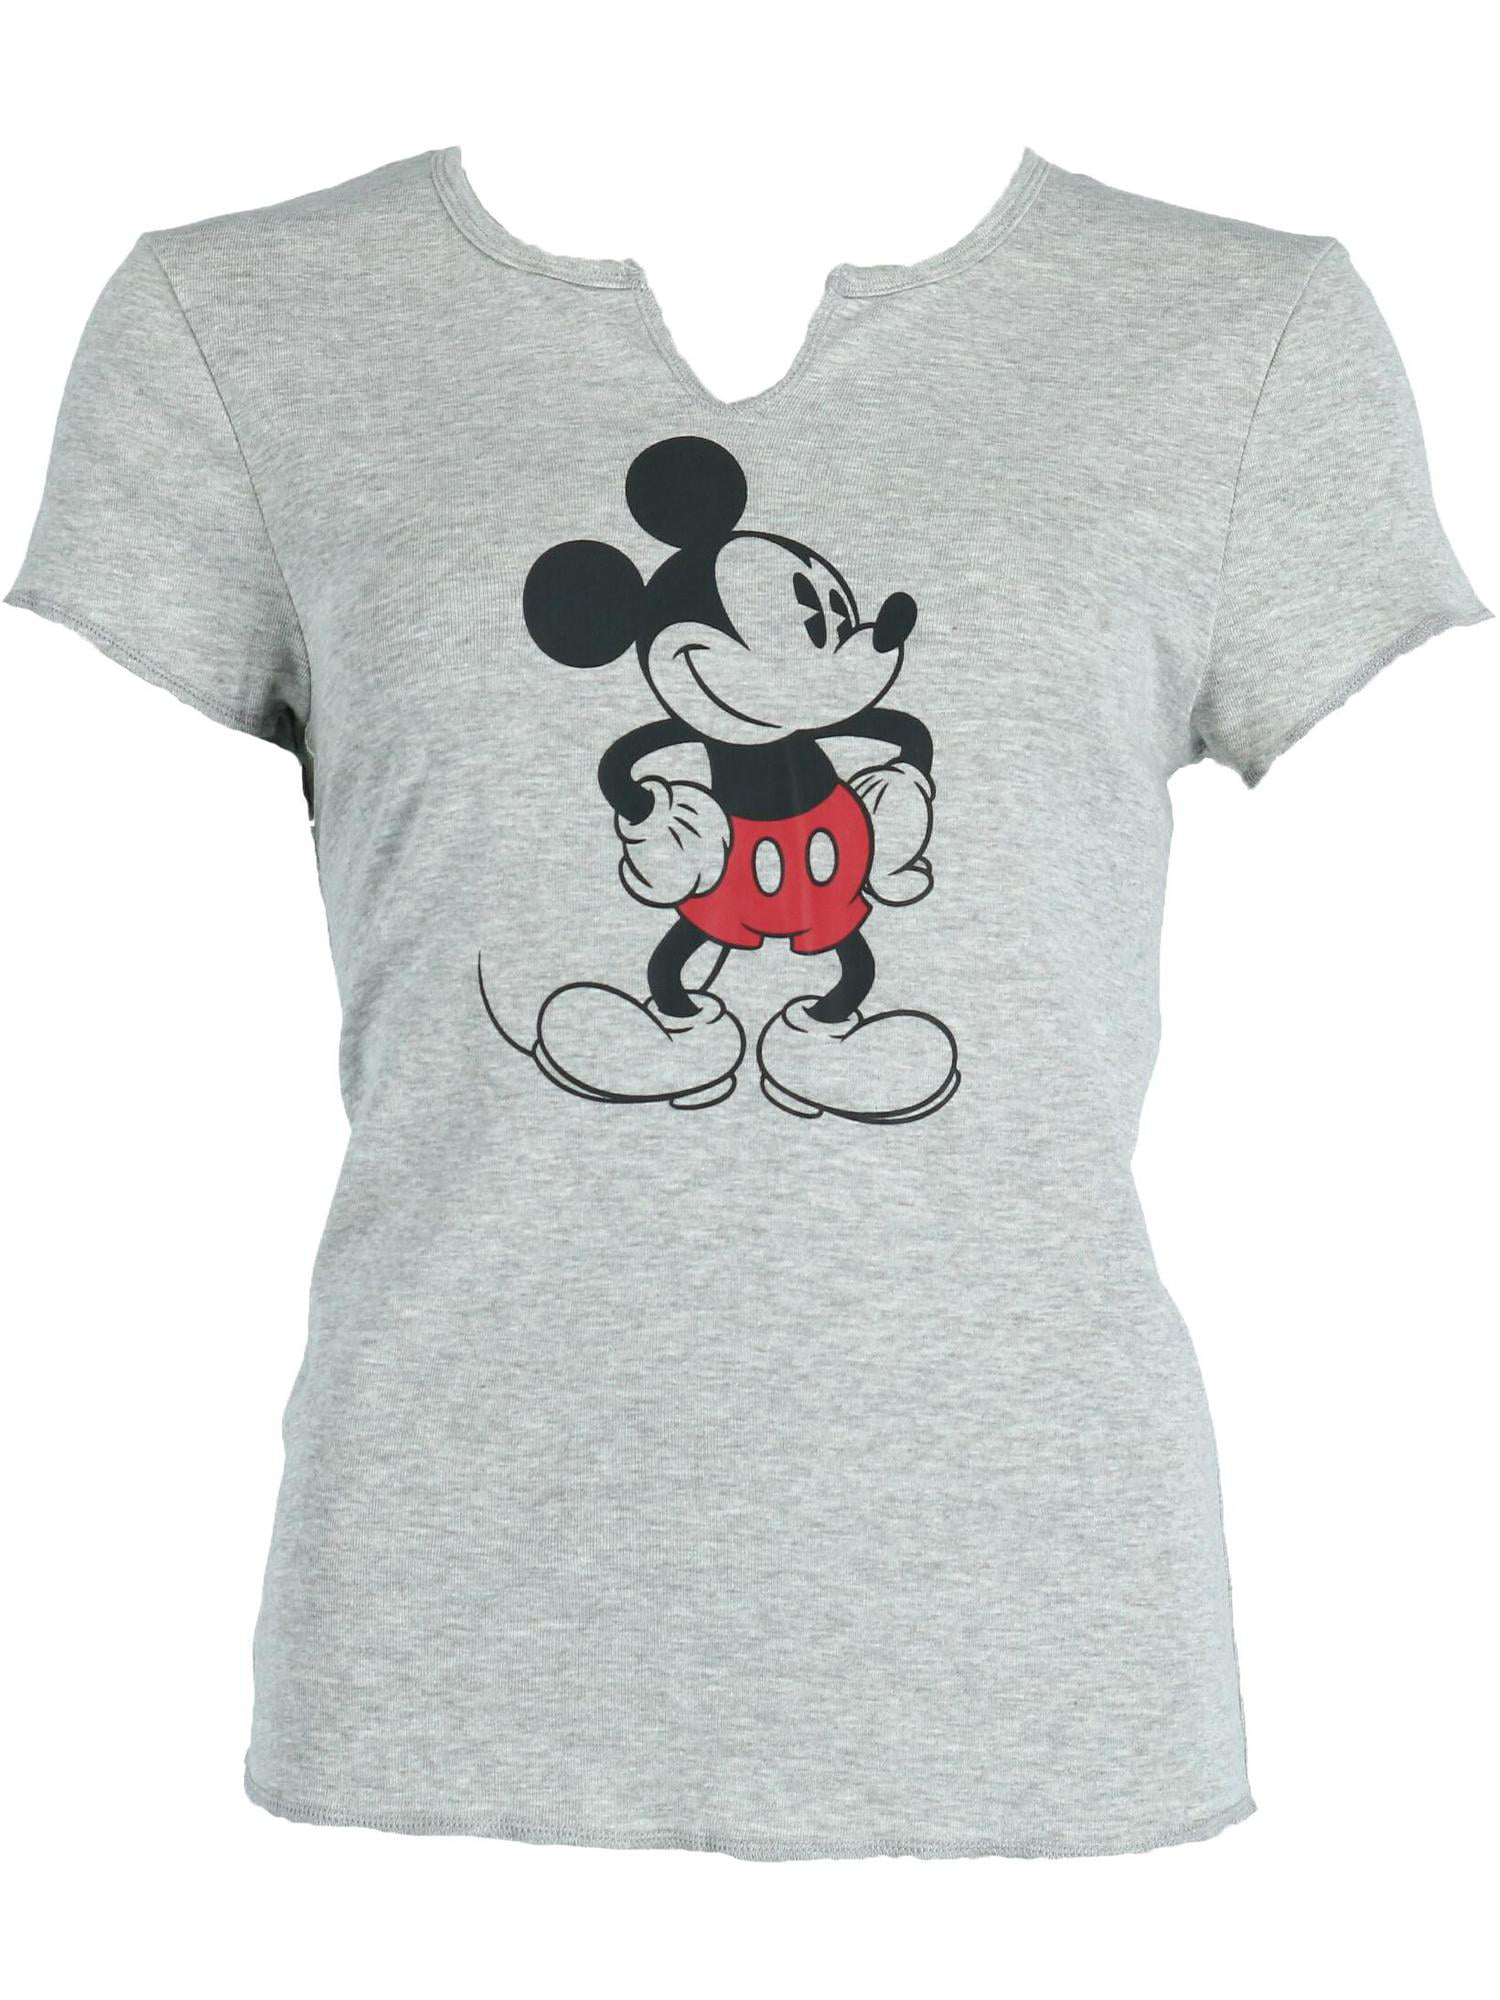 Disney Family Fun Youth Girl's Size 4 Mickey Mouse SS Top T-Shirt 